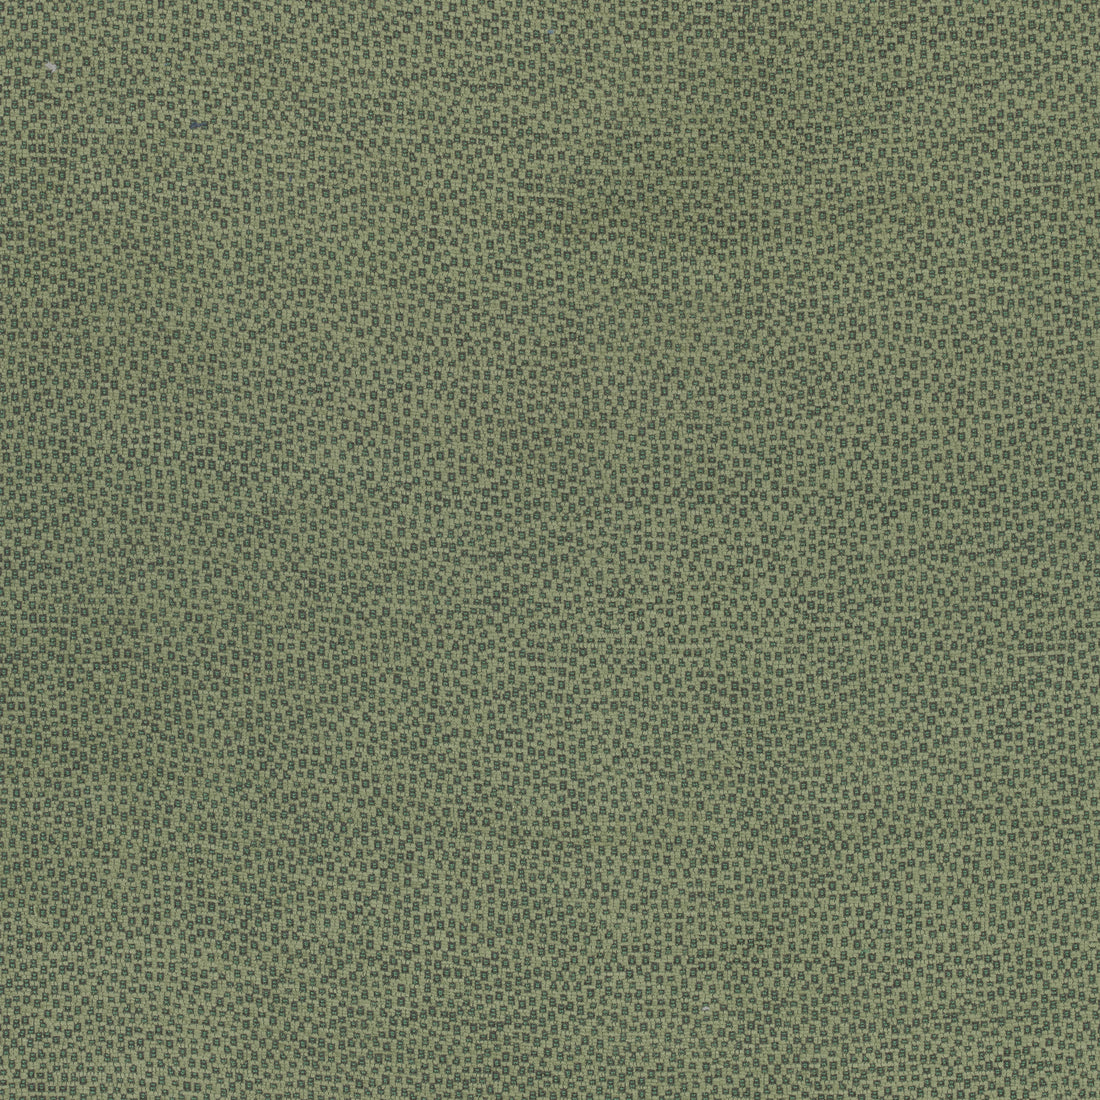 Nala fabric in emerald color - pattern number W74078 - by Thibaut in the Cadence collection